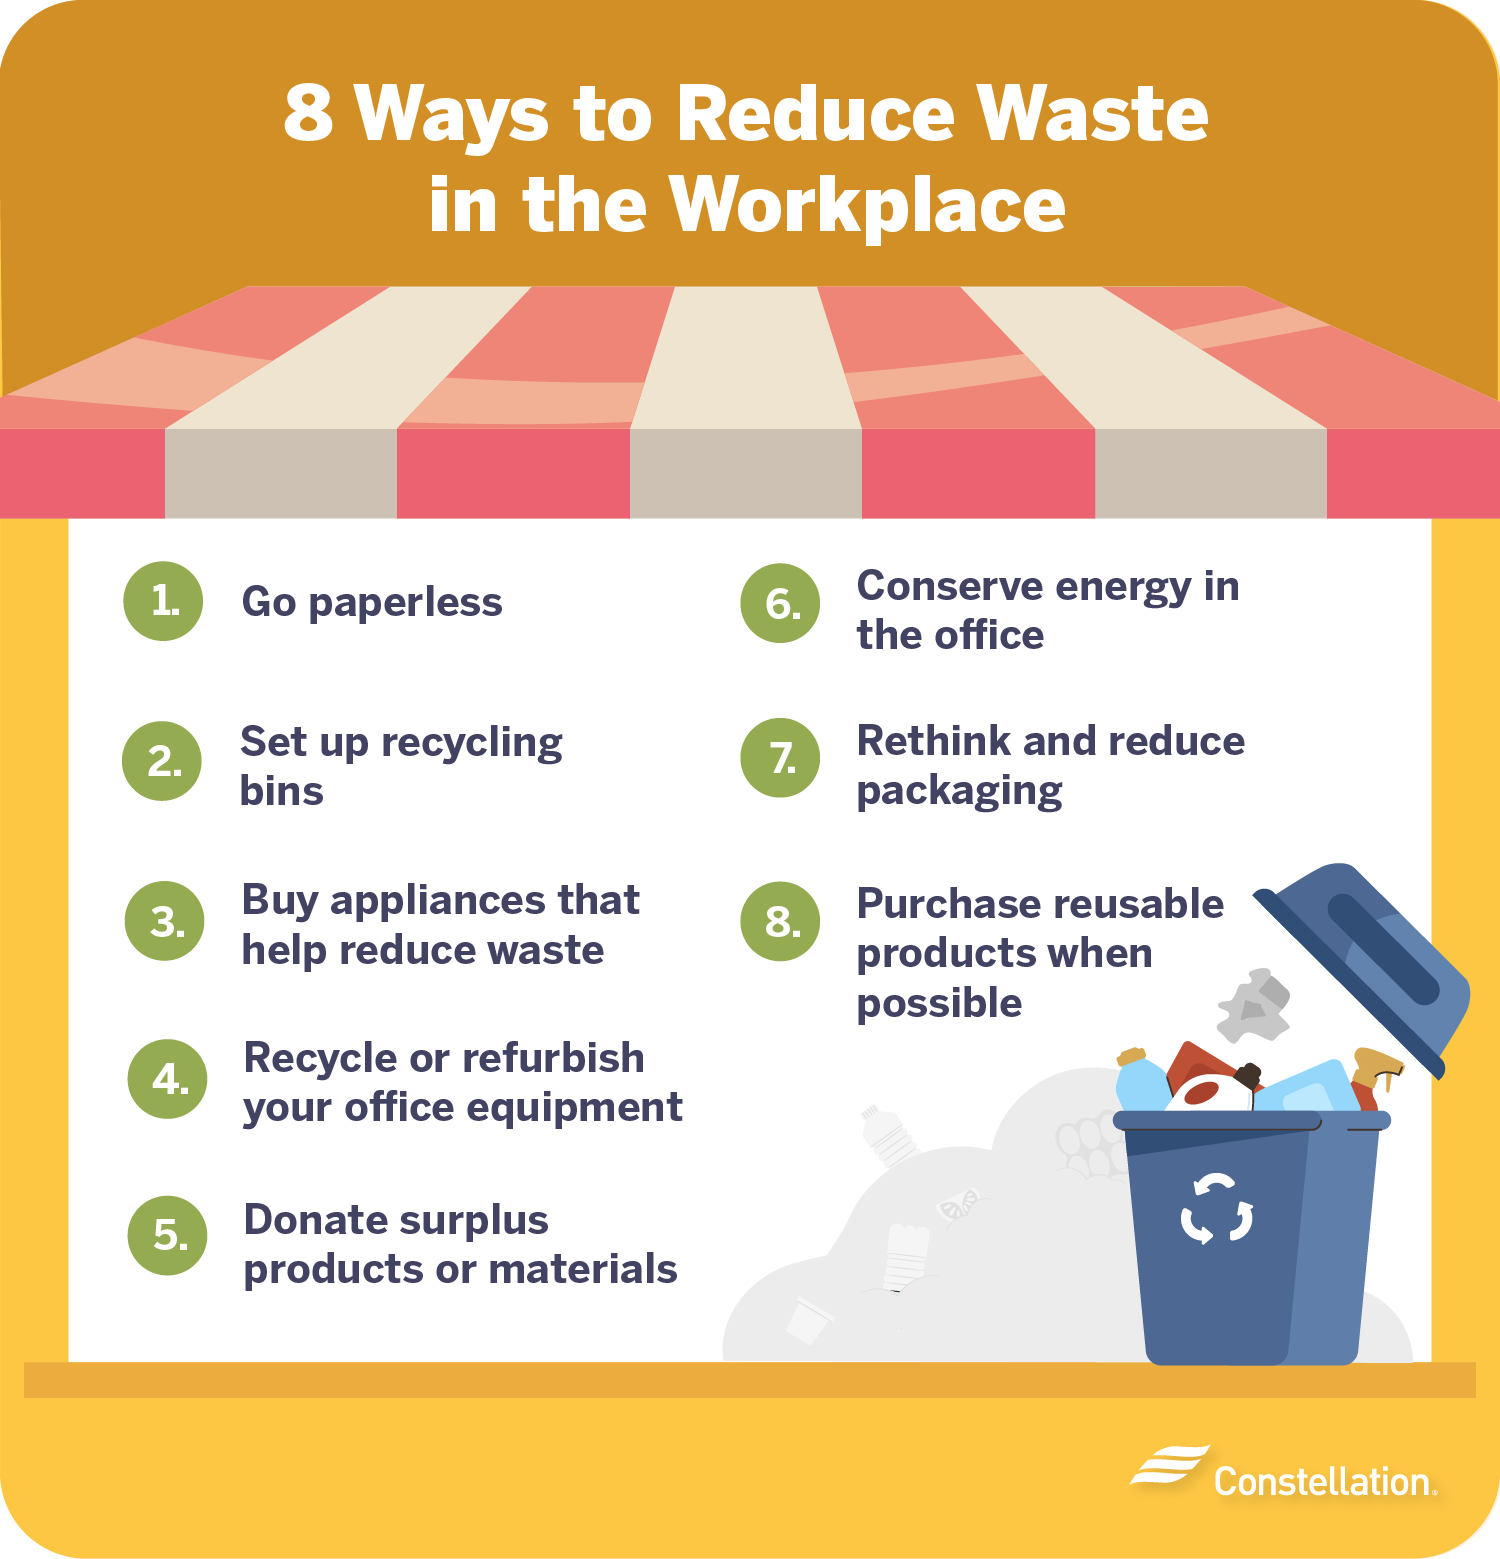 8 ways to reduce waste in the workplace.